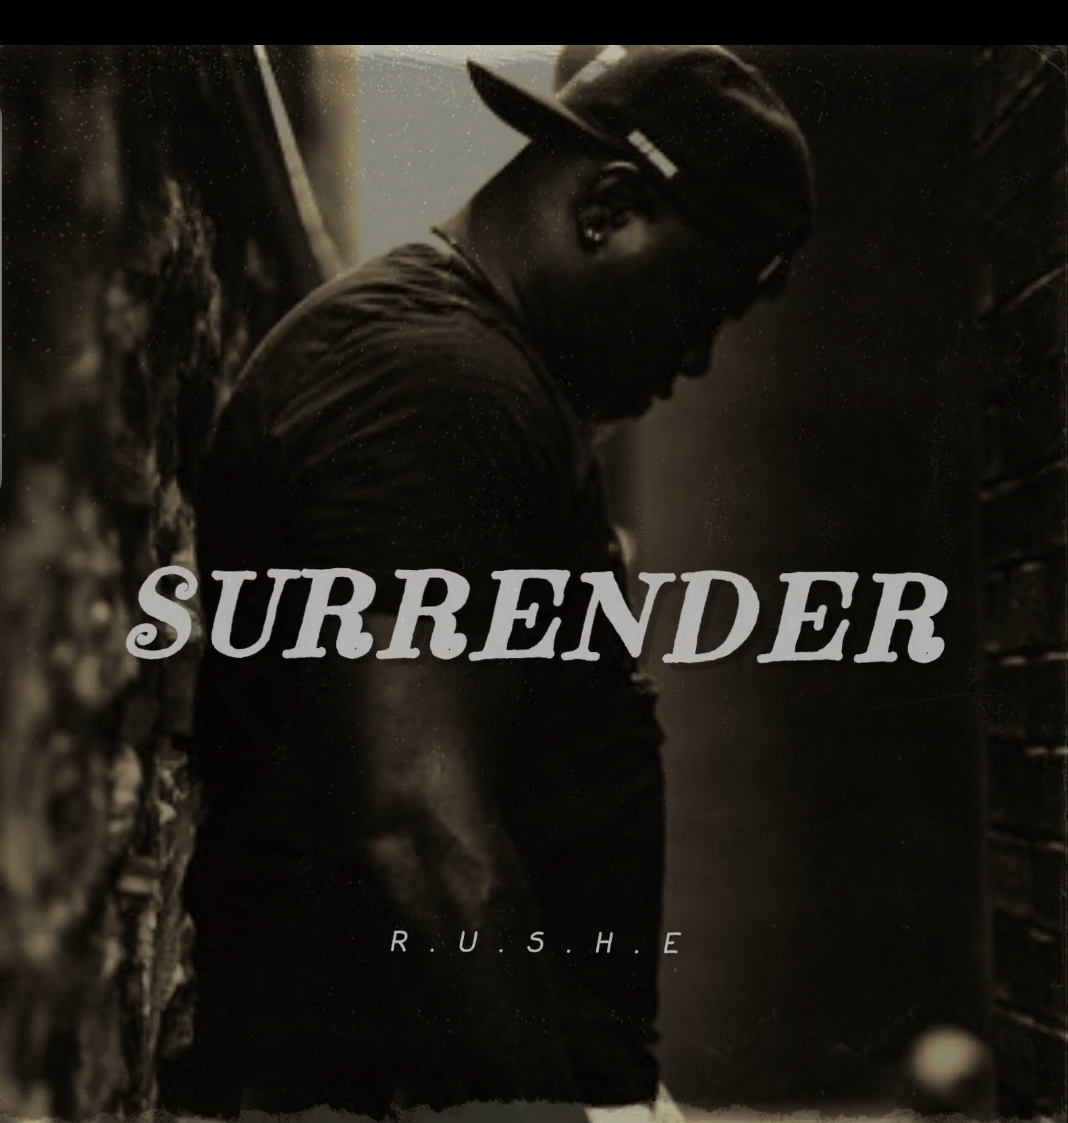 Art for Surrender  by R.U.S.H.E